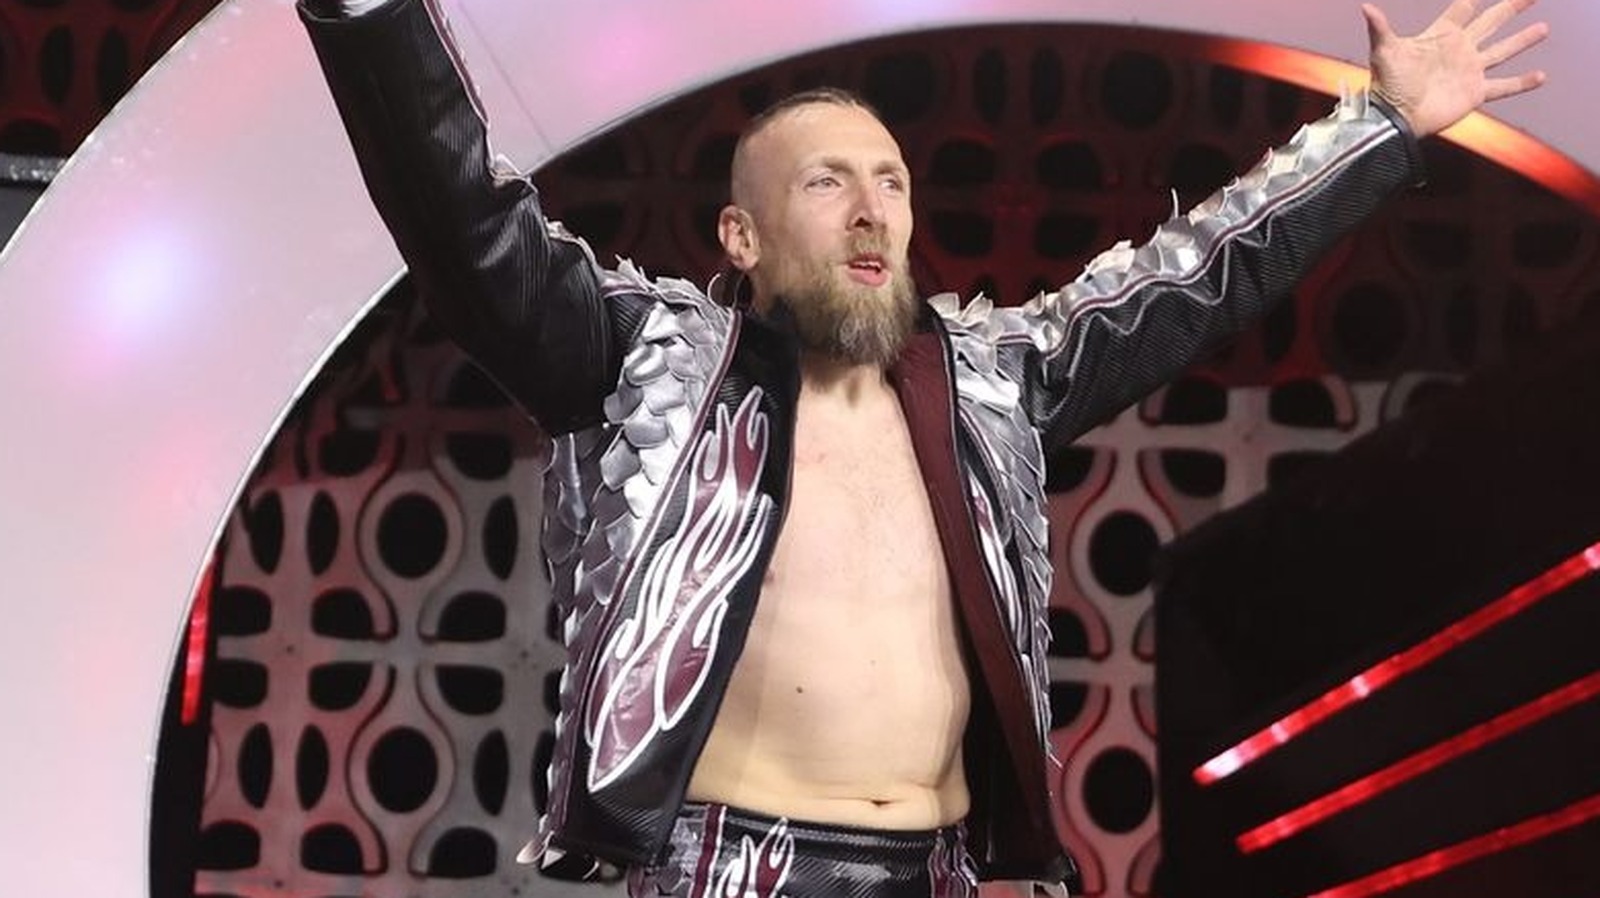 Bryan Danielson Discusses Potential AEW Match With Old Rival Nigel McGuiness